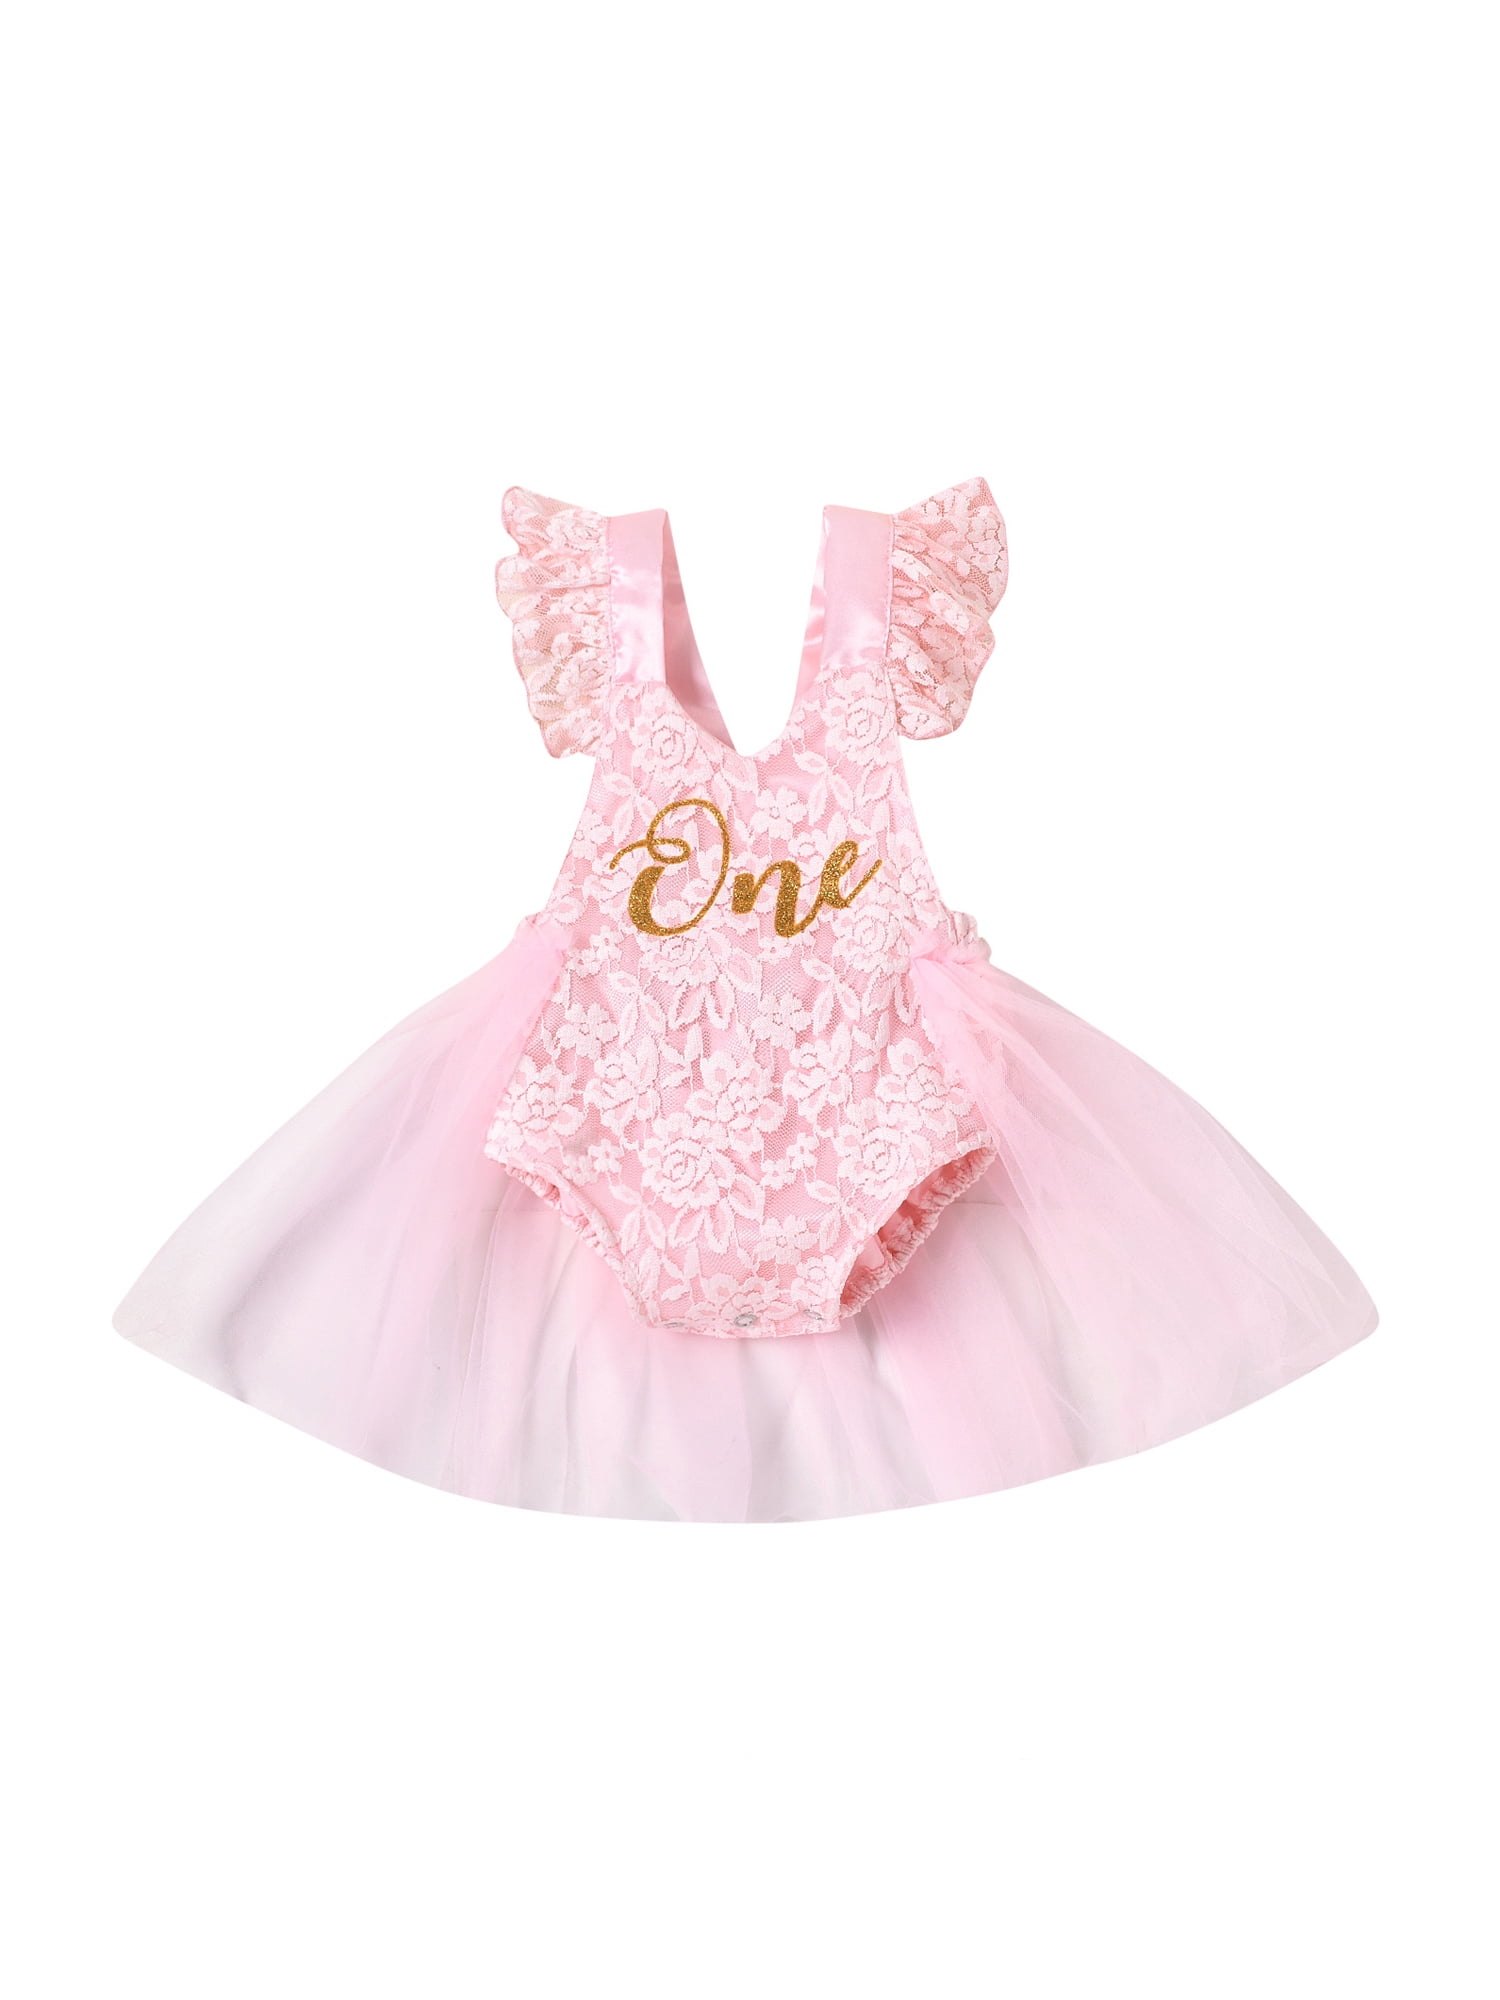 THE CUTEST PINK  BABY TUTU EVER !! 18-24 MTHS 